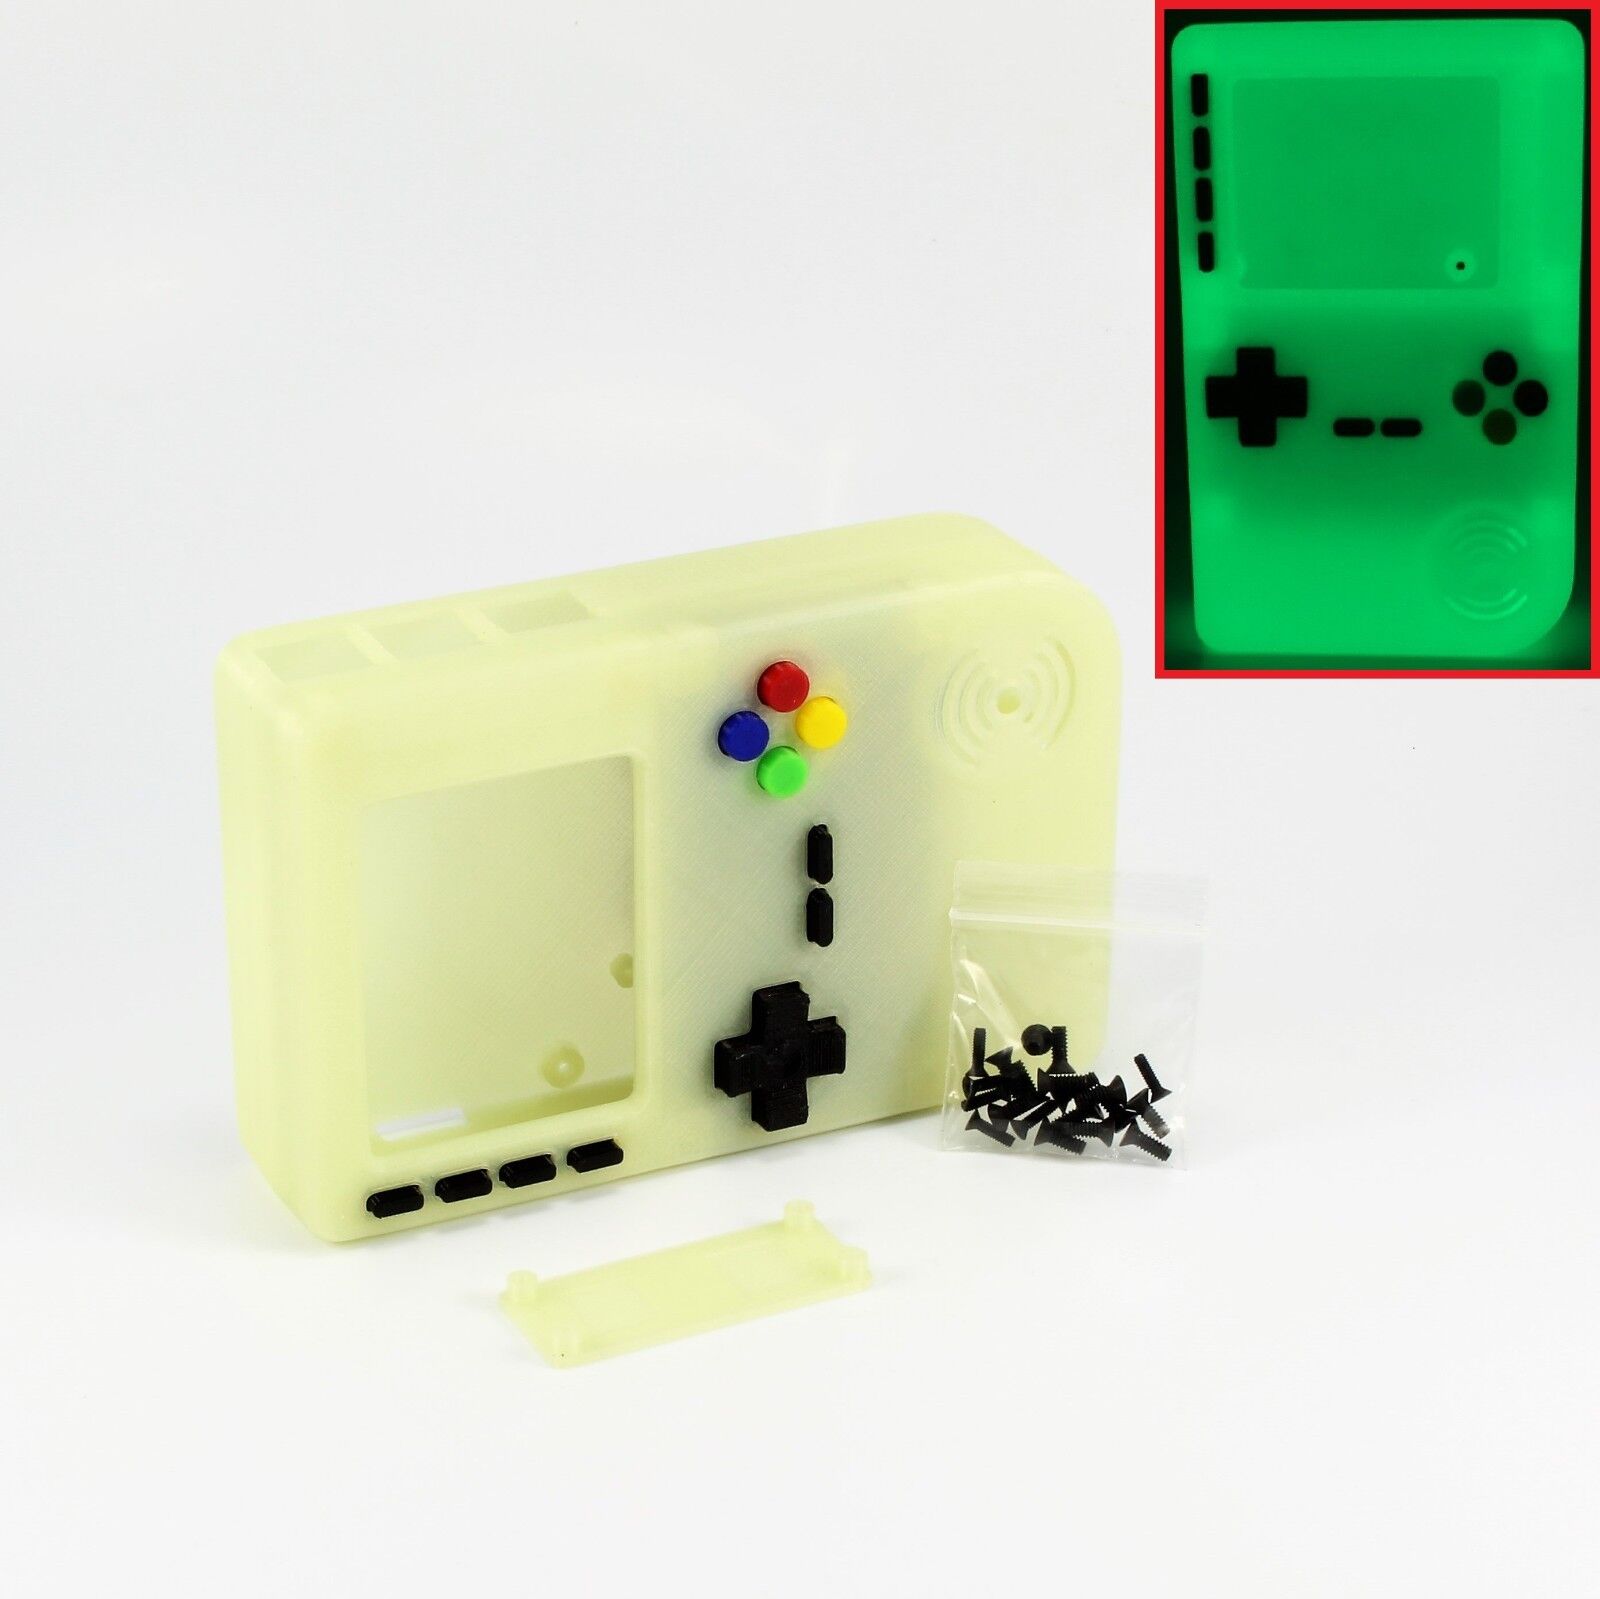 PiGRRL 2 GLOW GameBoy Case with Buttons & Screws for Raspberry Pi 2/3 Game Boy